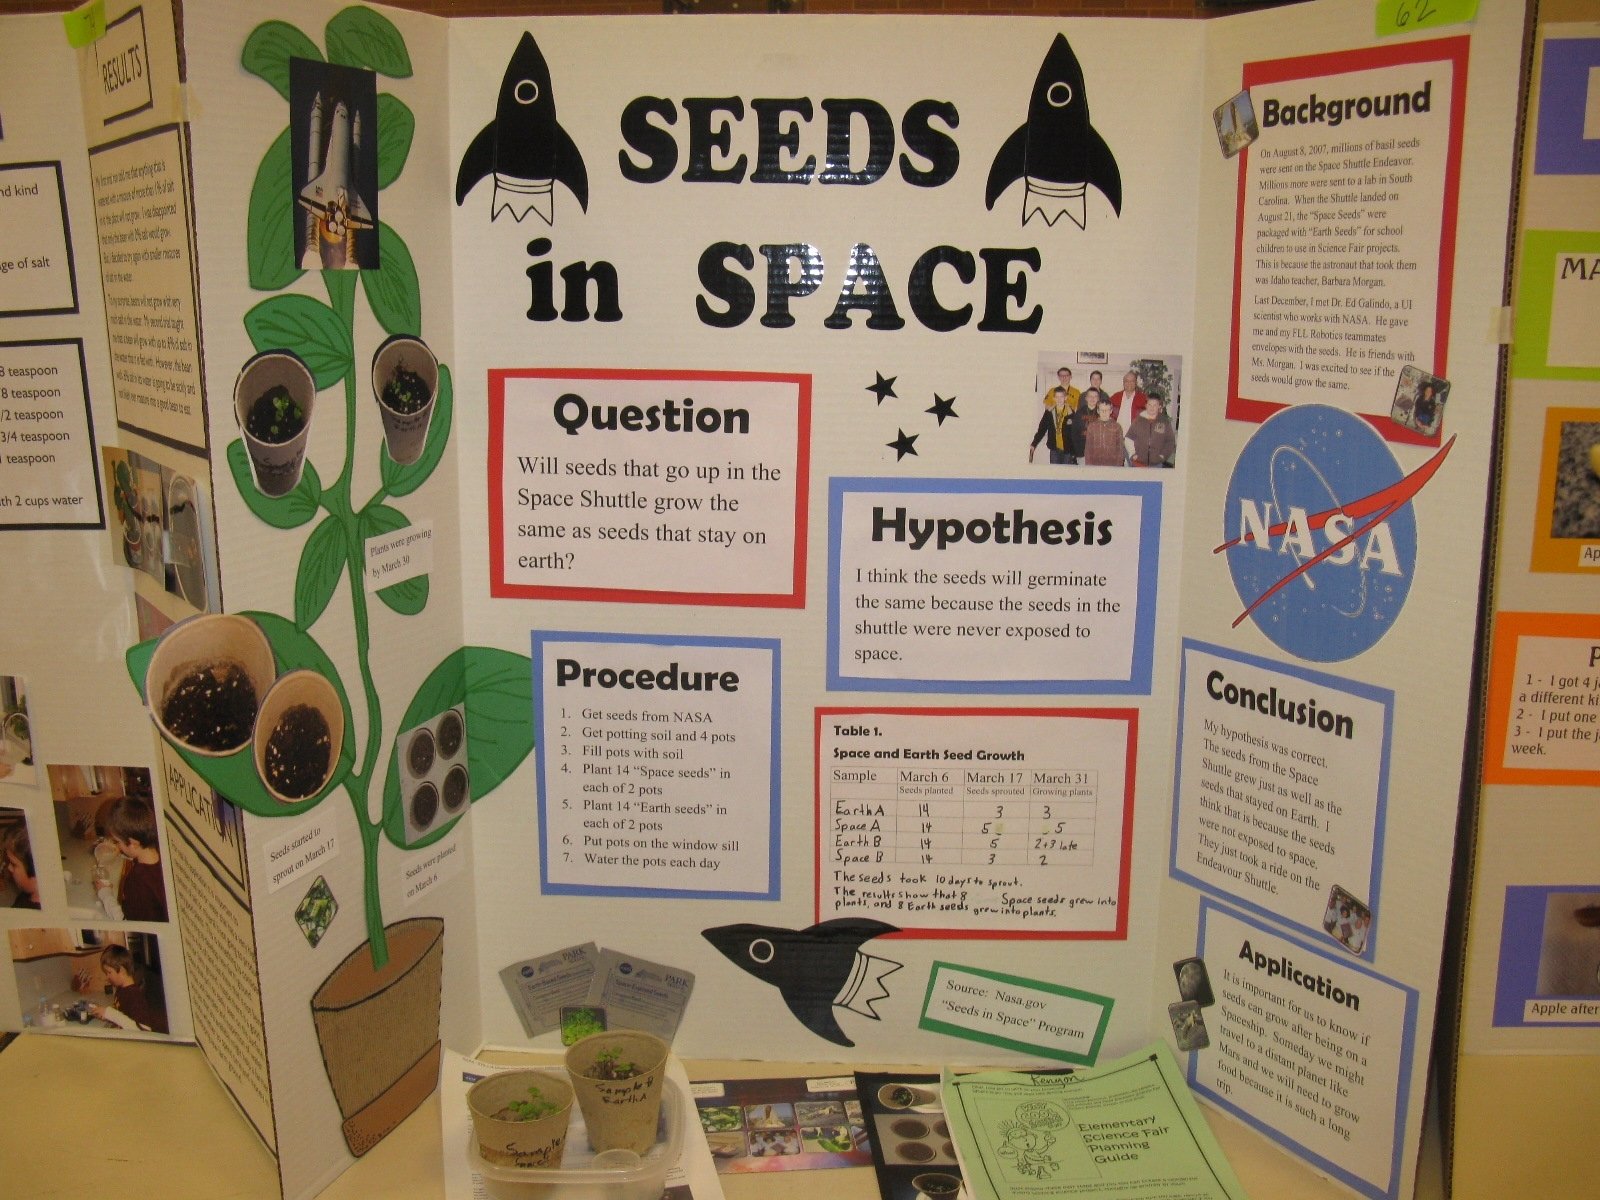 10 Most Popular Ideas For Science Fair Projects For 5Th Graders fifth grade science fair projects term paper academic writing service 3 2022